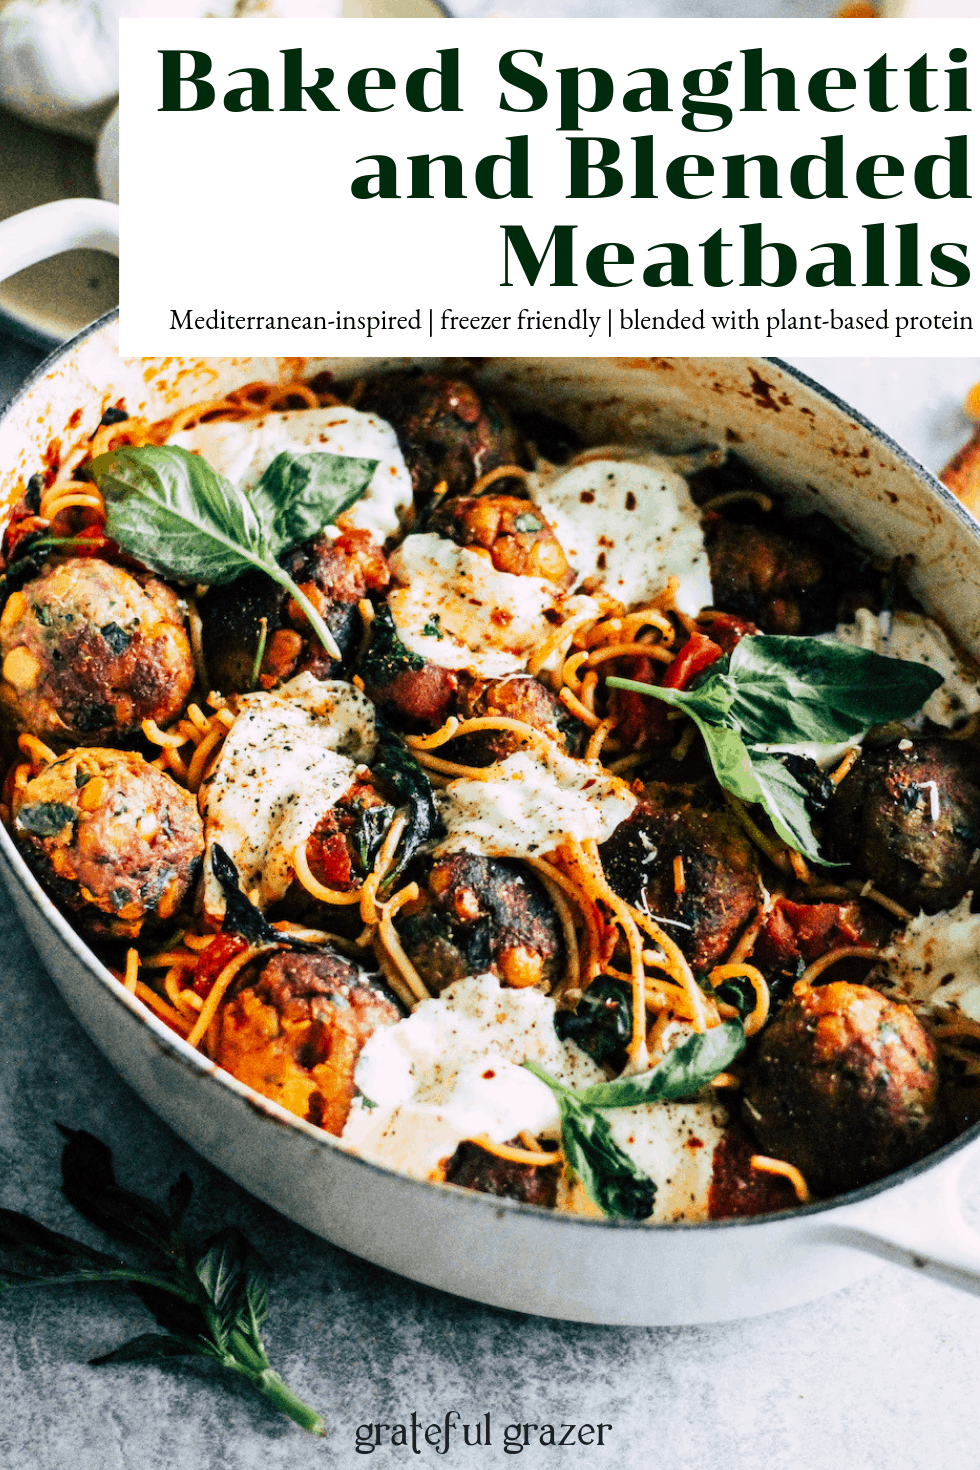 White pot of pasta in text that reads, "Baked Spaghetti and Blended Meatballs: Mediterranean-inspired, freezer friendly, blended with plant-based protein."